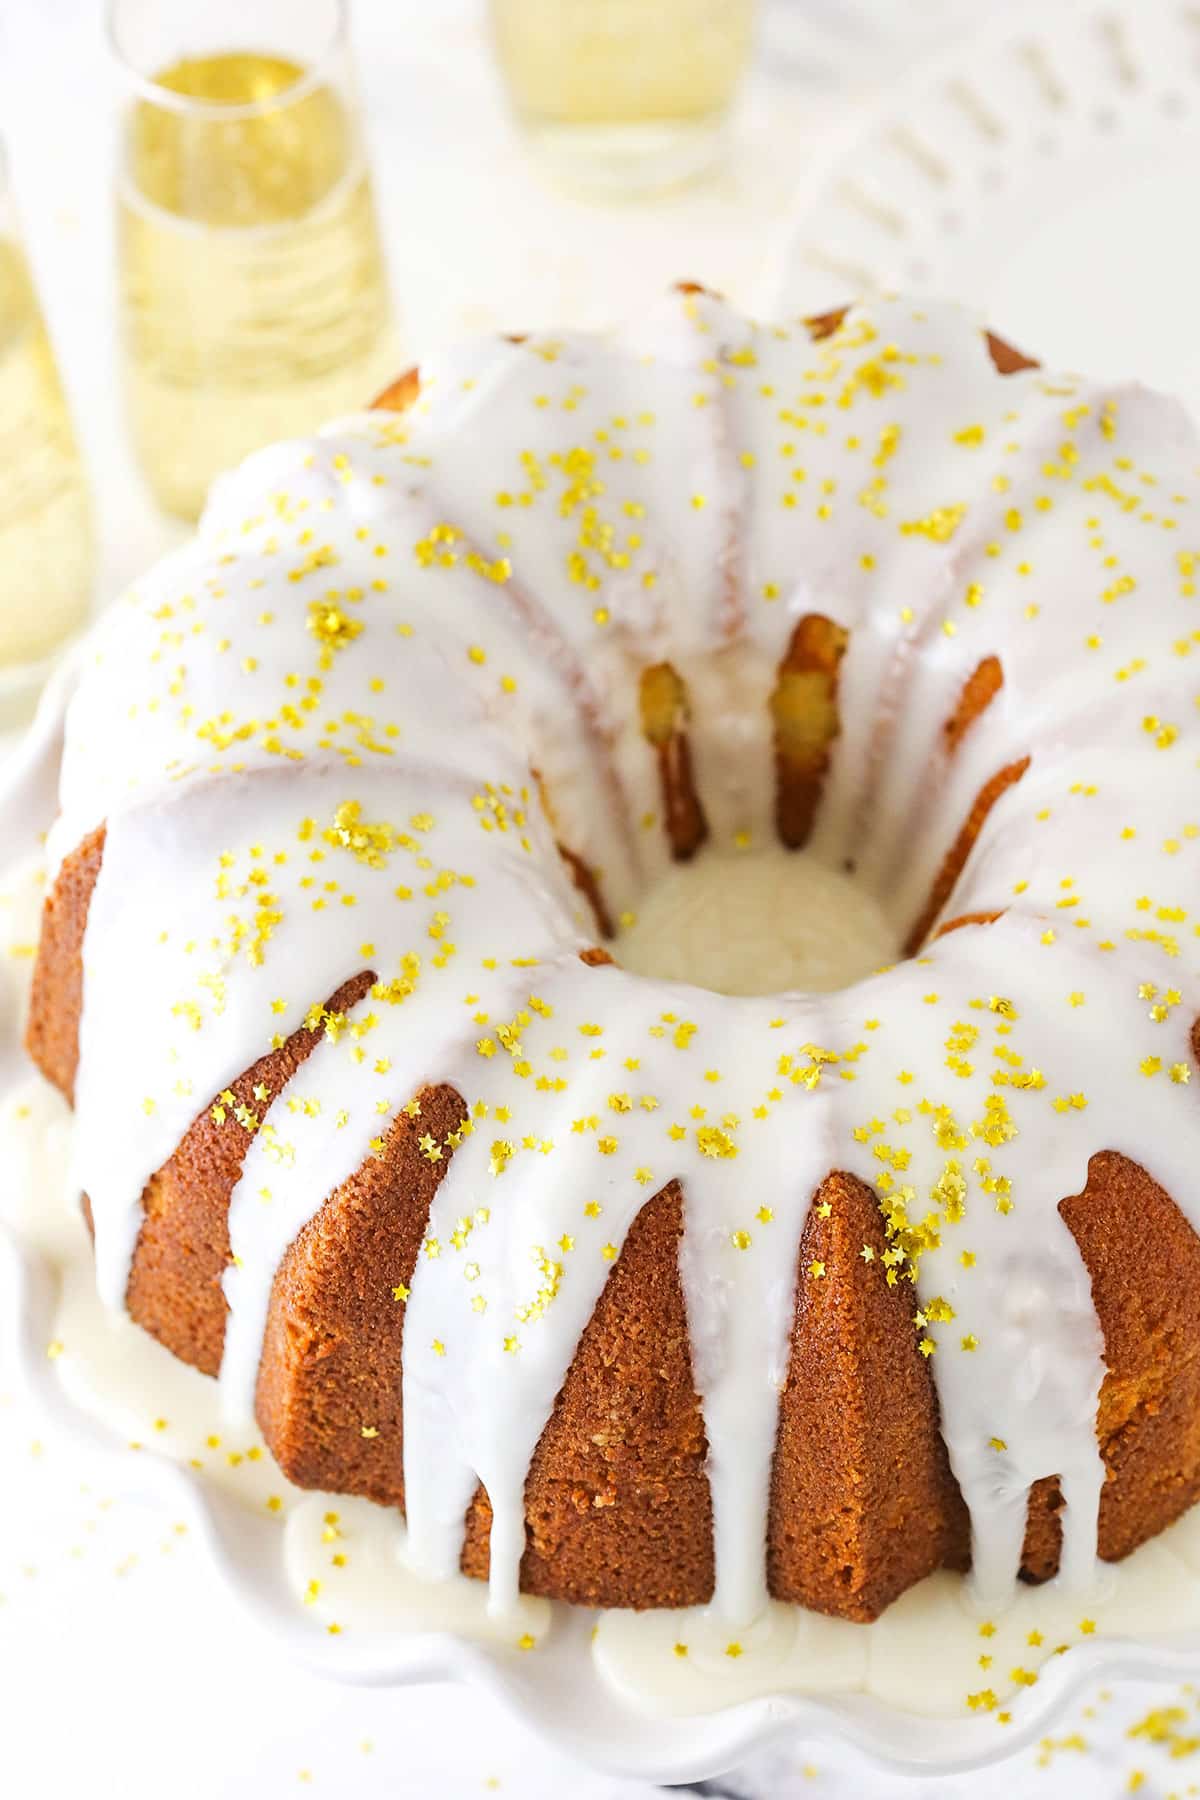 Best Pound Cake Recipe {with Topping Ideas} - Cooking Classy